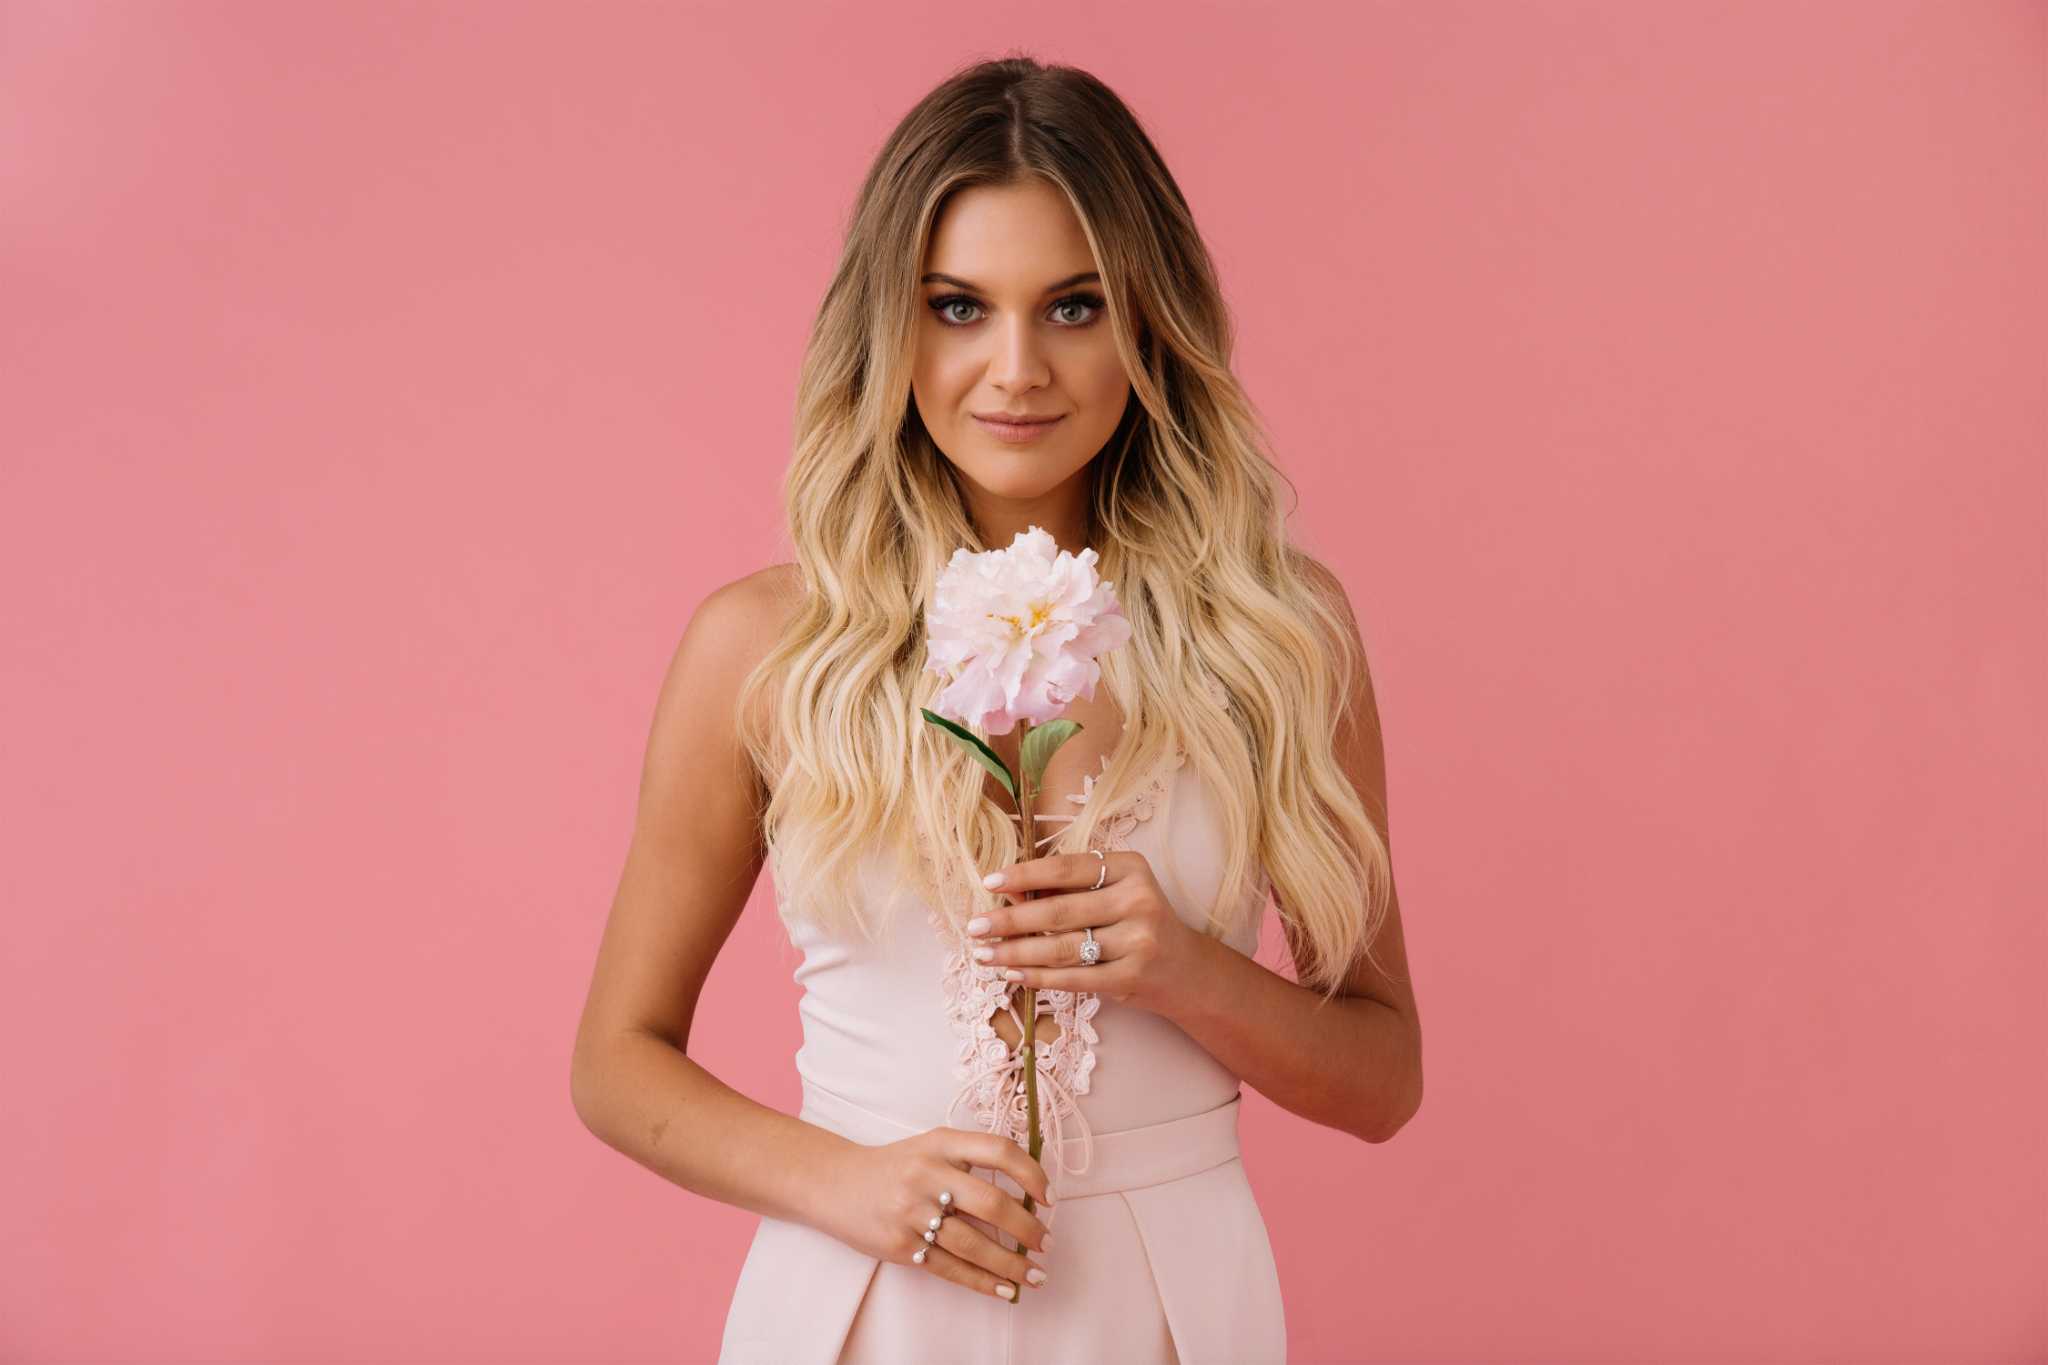 Kelsea Ballerini is young, blond and writes sweetly personal, country-pop s...